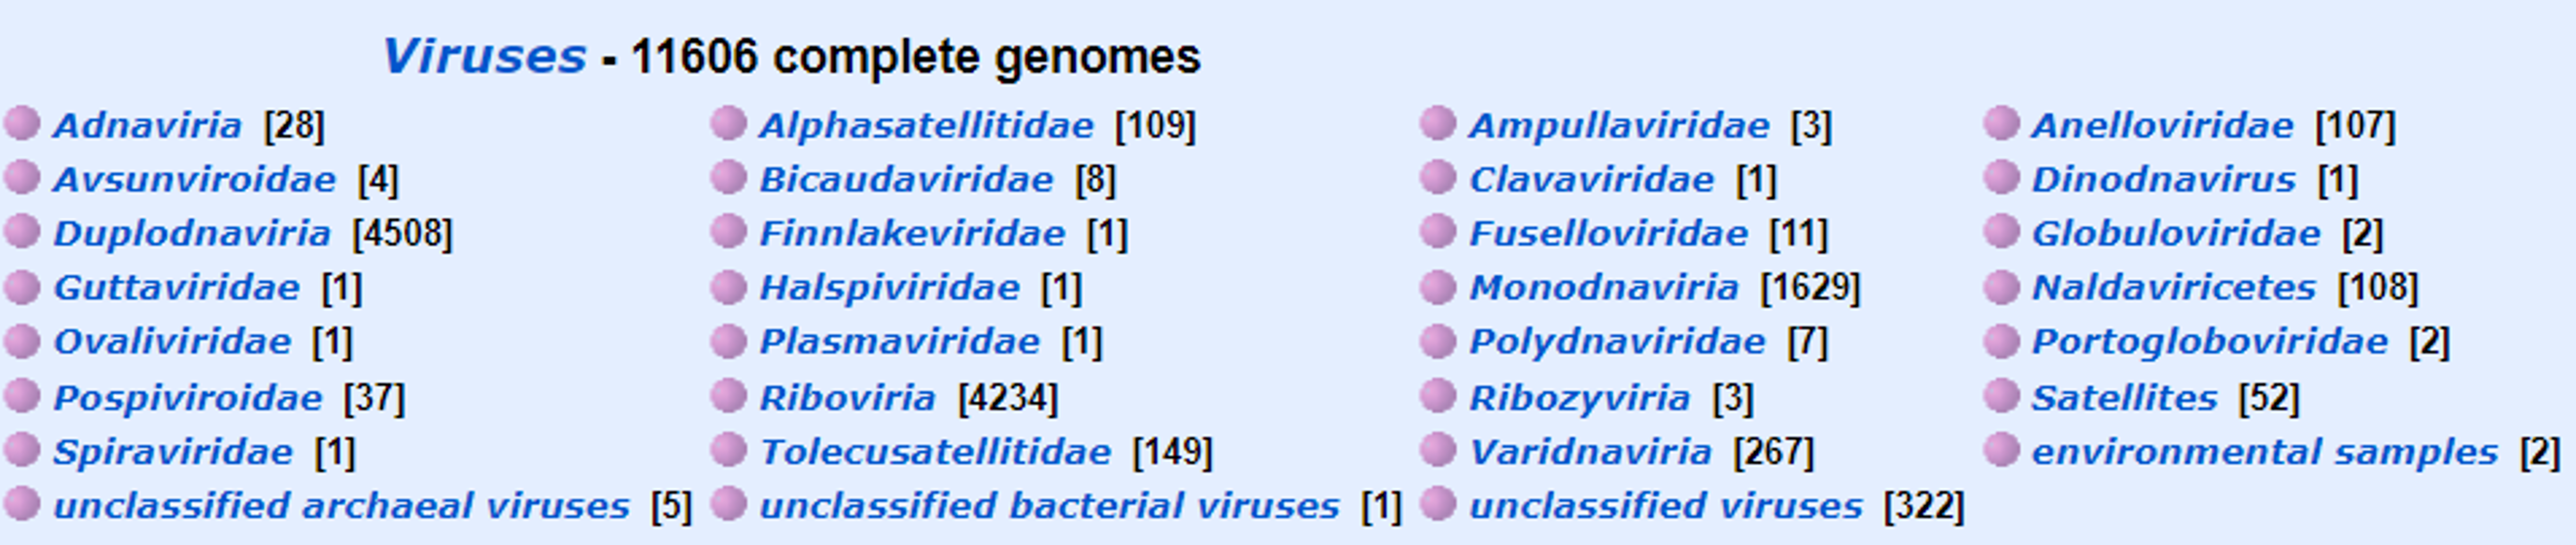 Summary of the numbers of complete viral genomes on the viral genome summary page